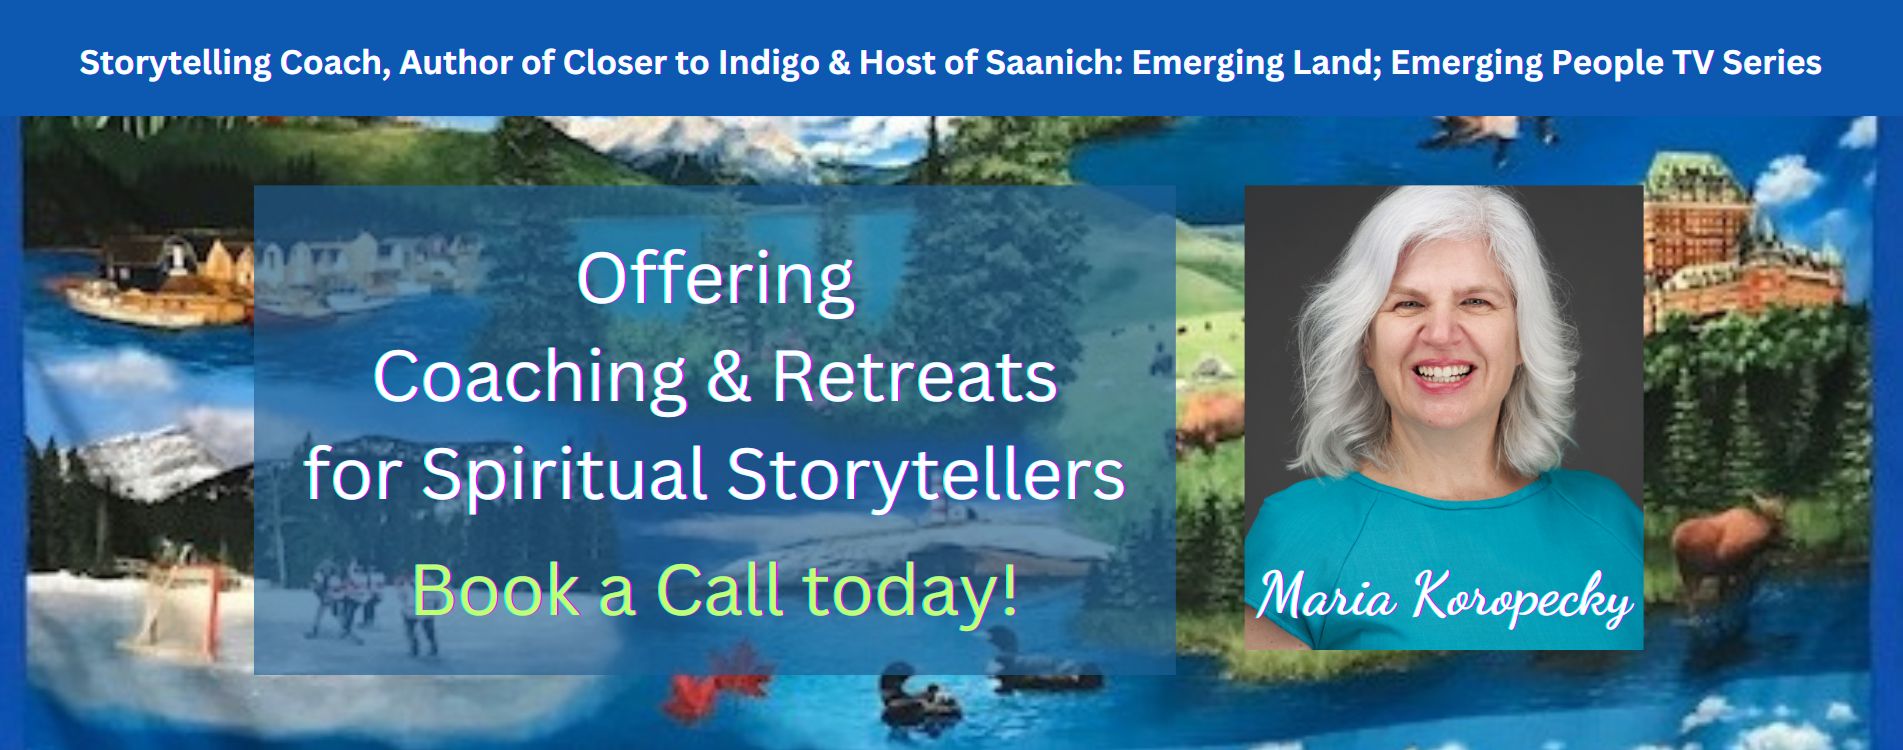 Offering coaching and retreats to spiritual storytellers.